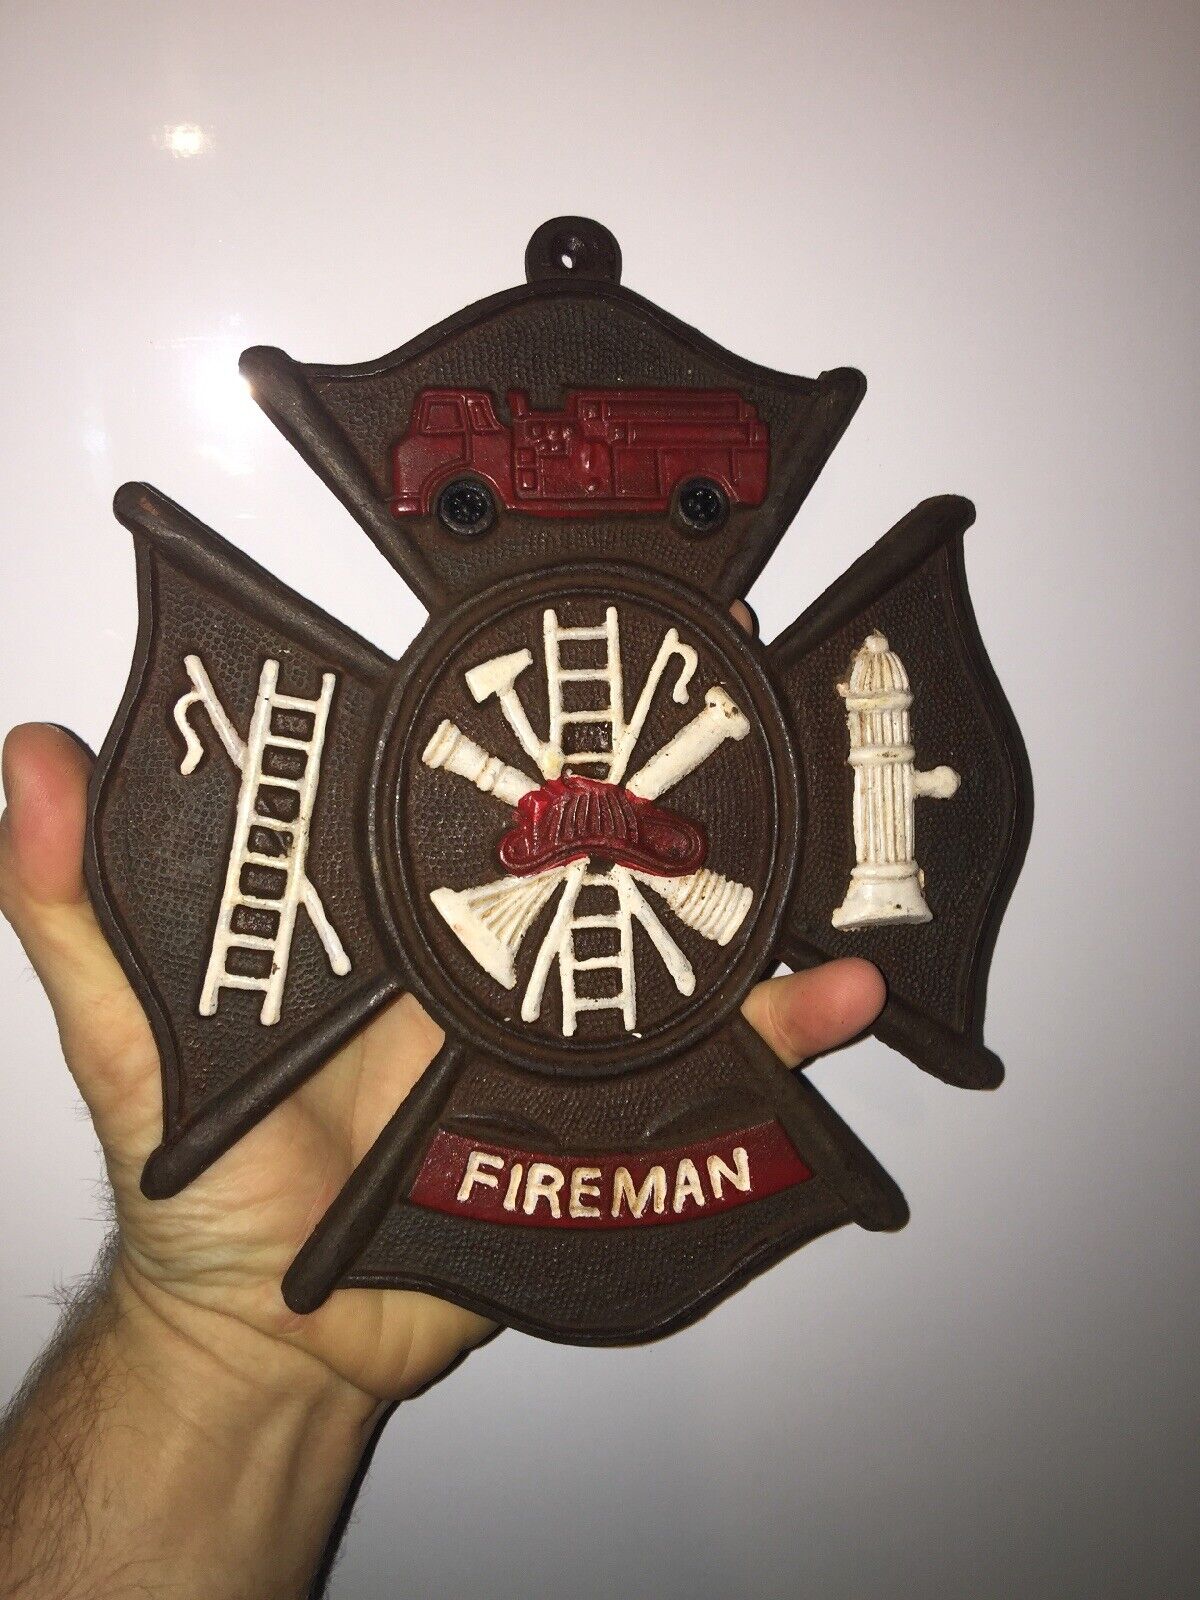 Firefighter Sign Fireman Rescue Cast Iron Plaque Fire Chief Rustic Patina 2LB+